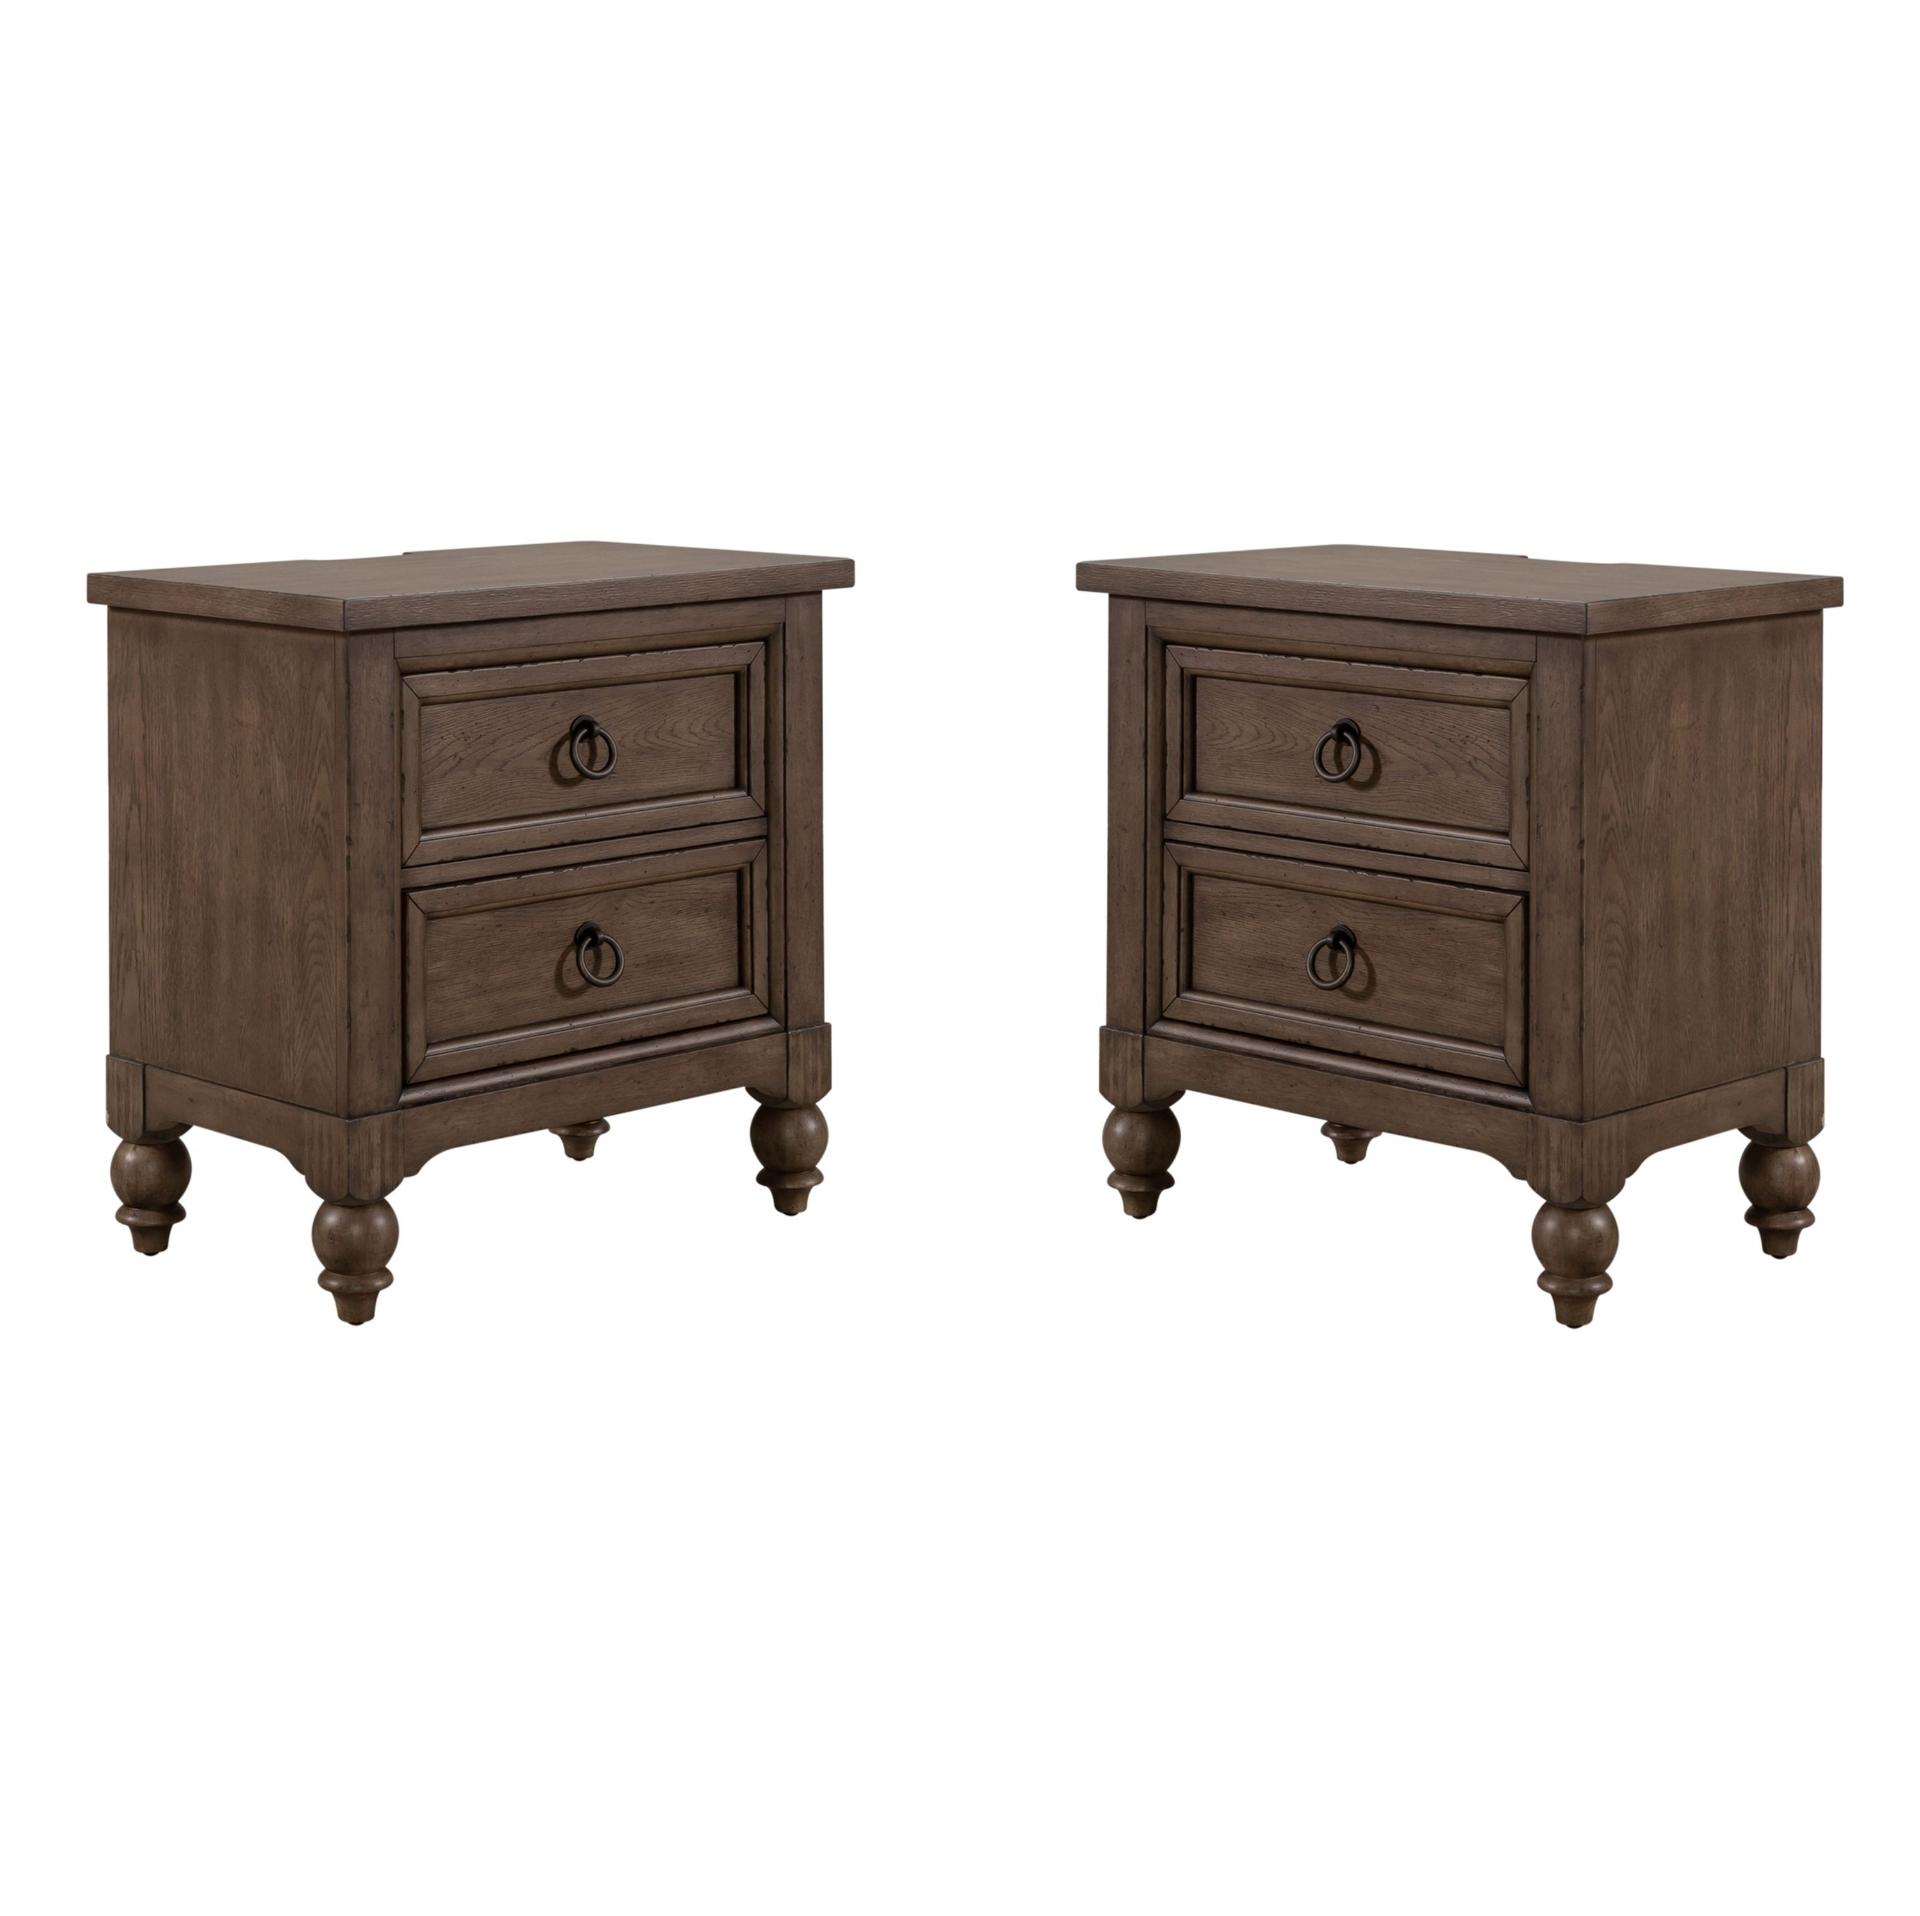 Transitional Nightstand Set Americana Farmhouse (615-BR) 615-BR61-Set-2 in Taupe 